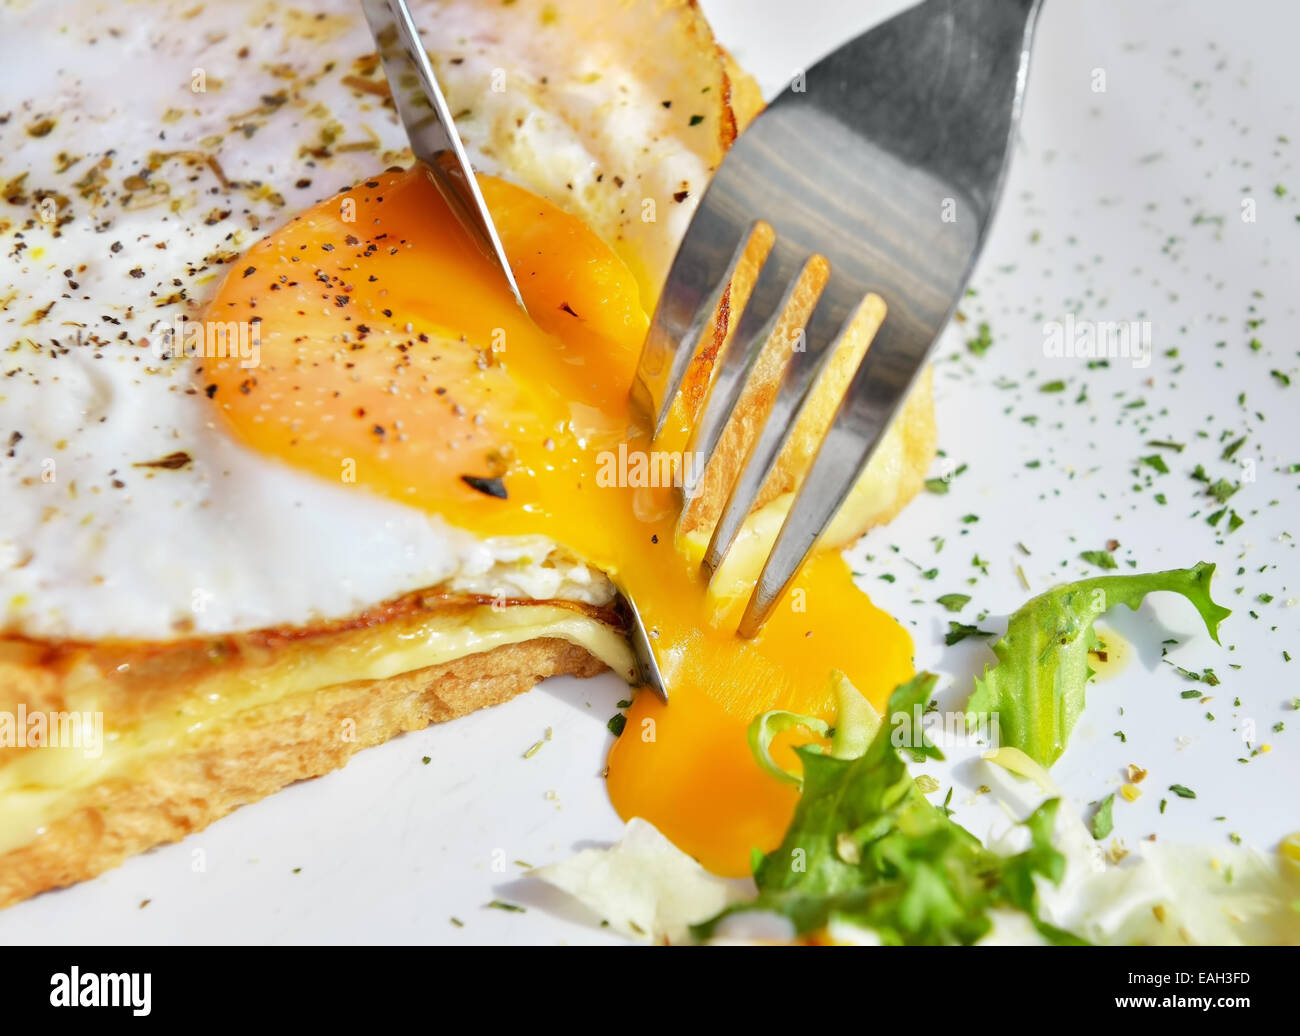 Eating belgian dish croque-madame with beautiful fried eggs, bread and ham, shallow DOF in natural light closeup image Stock Photo